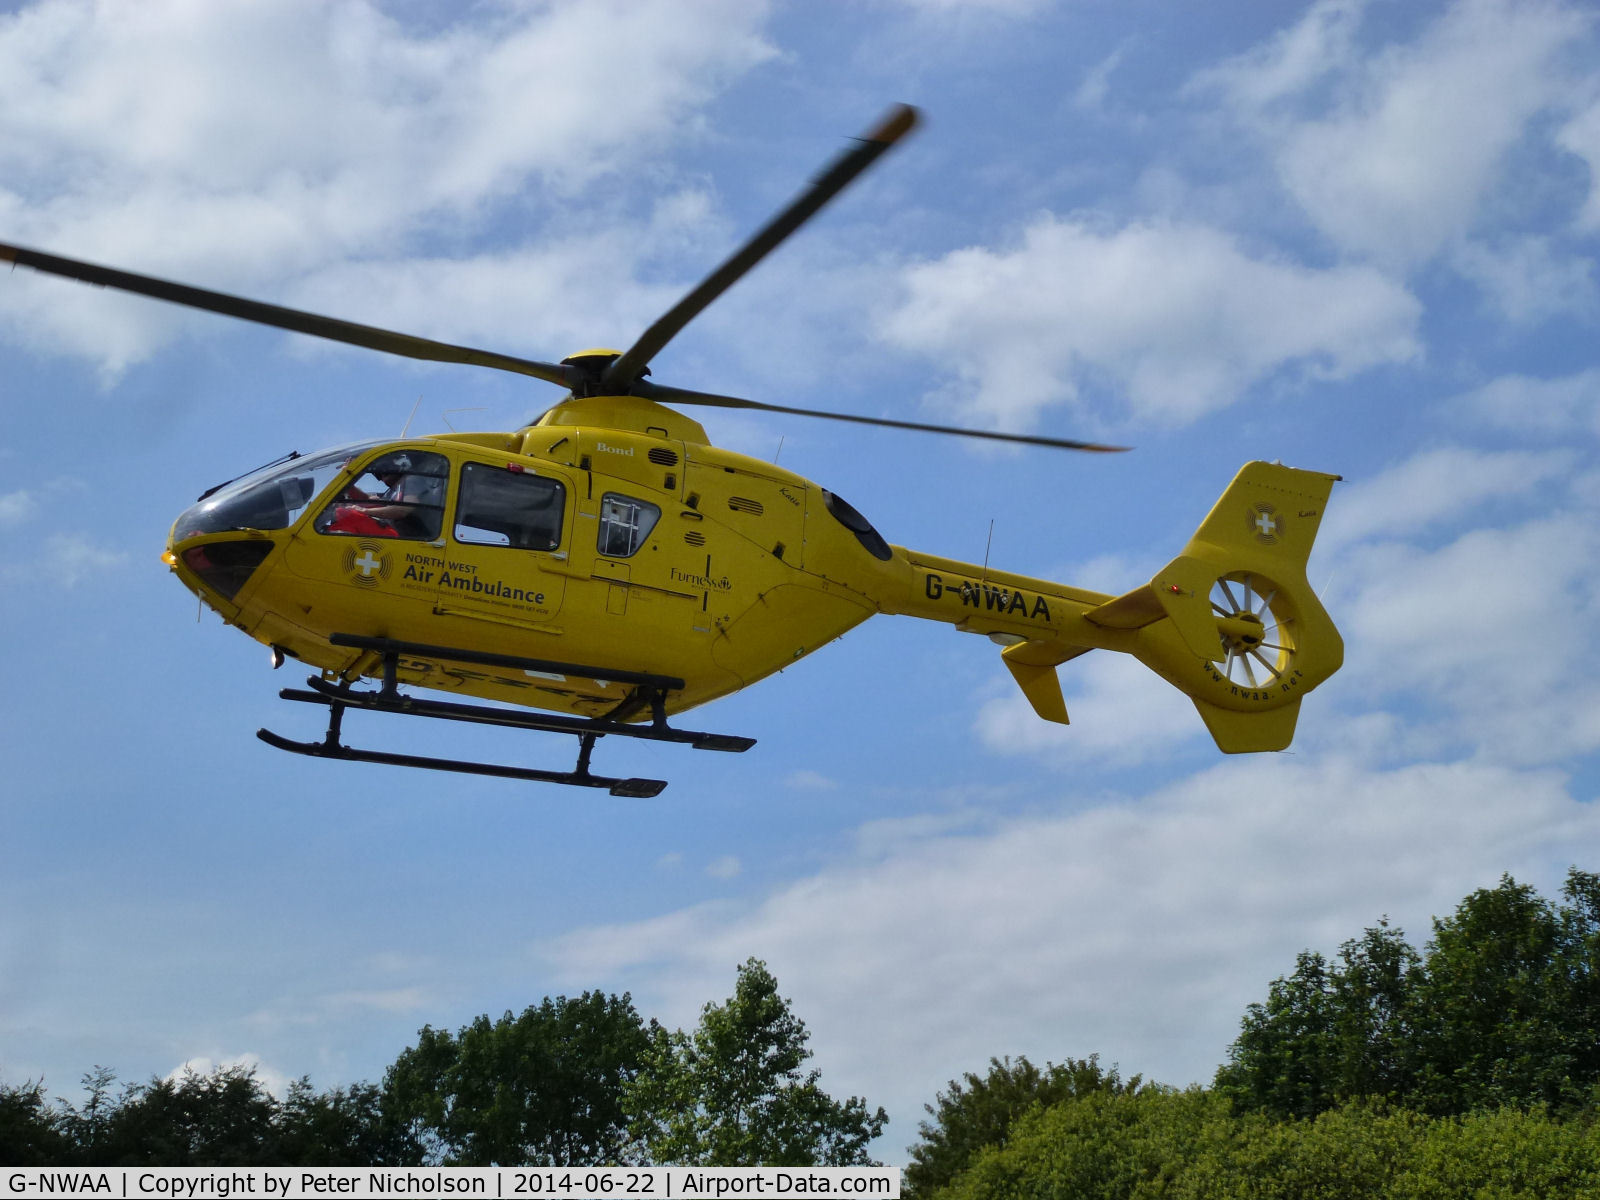 G-NWAA, 2005 Eurocopter EC-135T-2 C/N 0427, This North-West Air Ambulance Eurocopter EC-135T-2 visited the Cumberland Infirmary in June 2014.